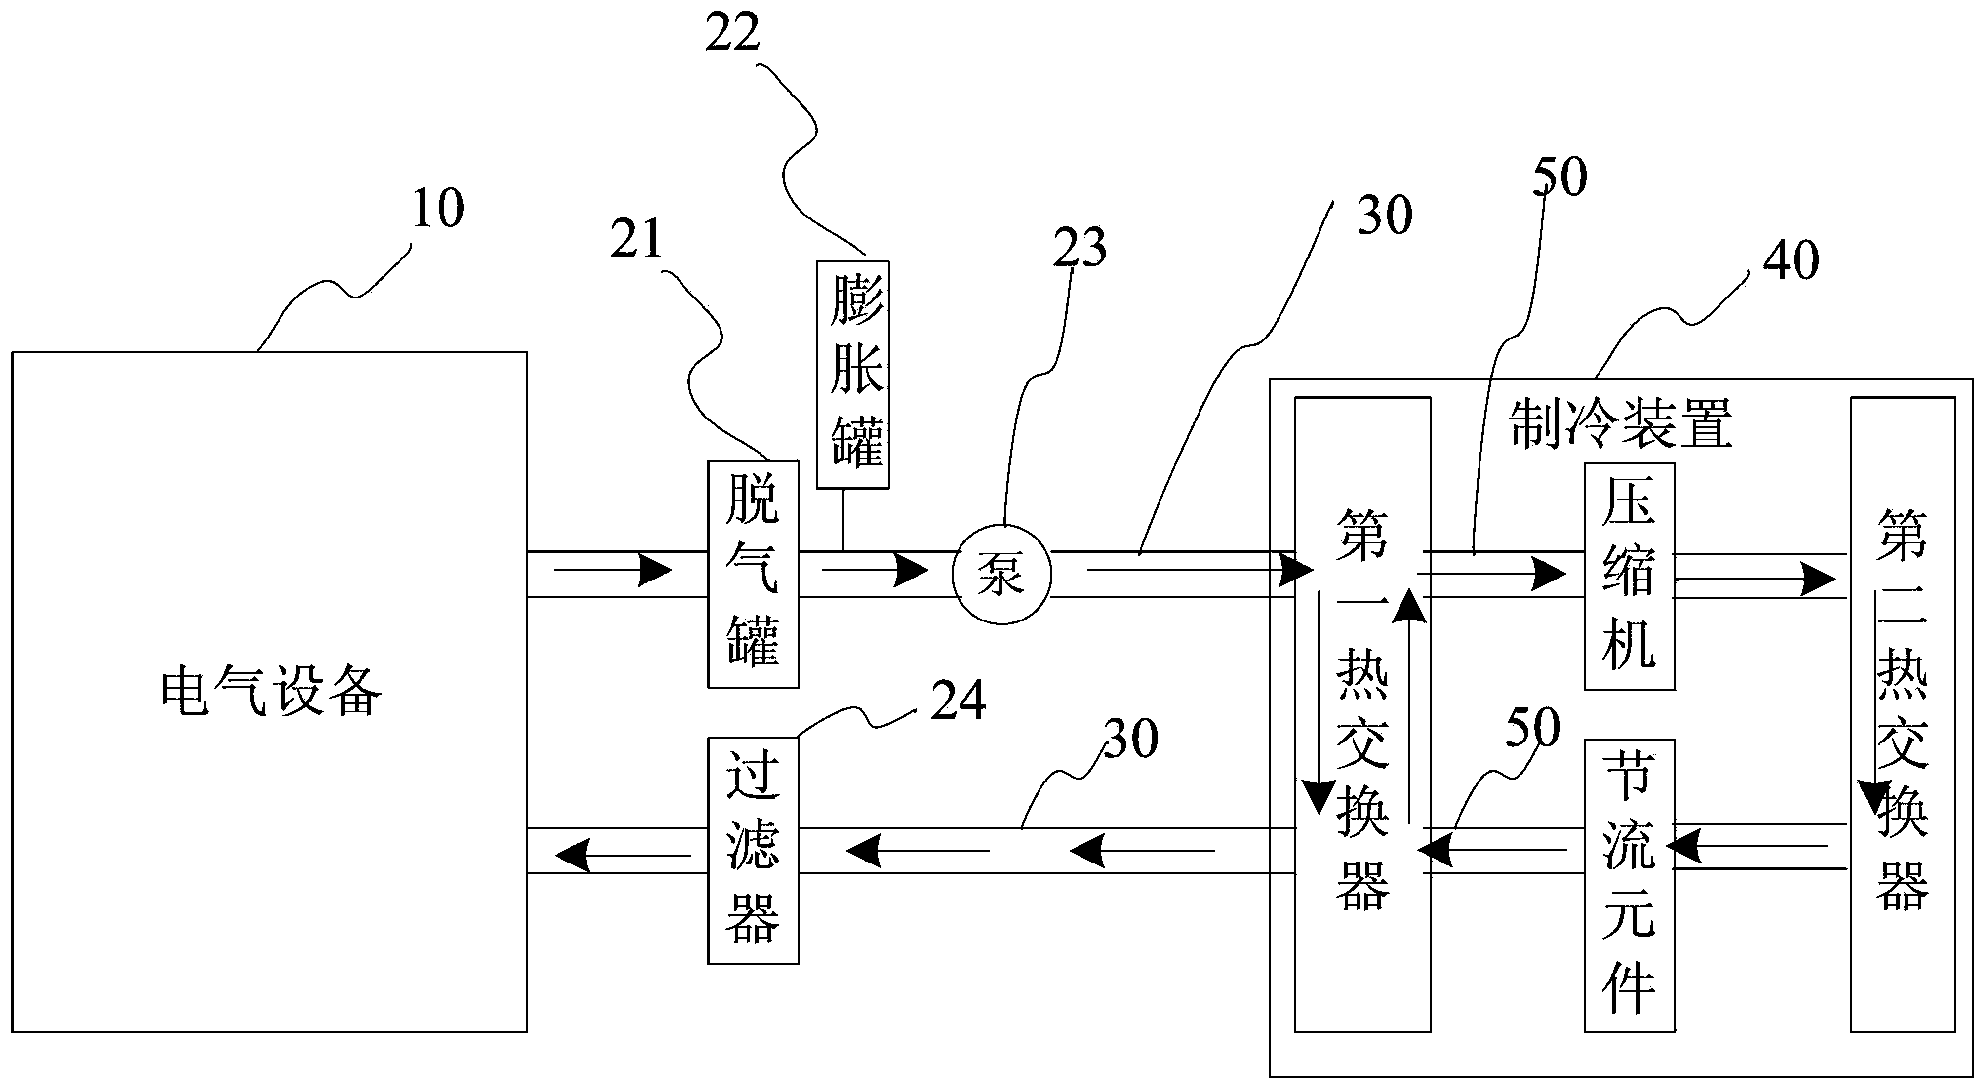 Cooling system for electrical device